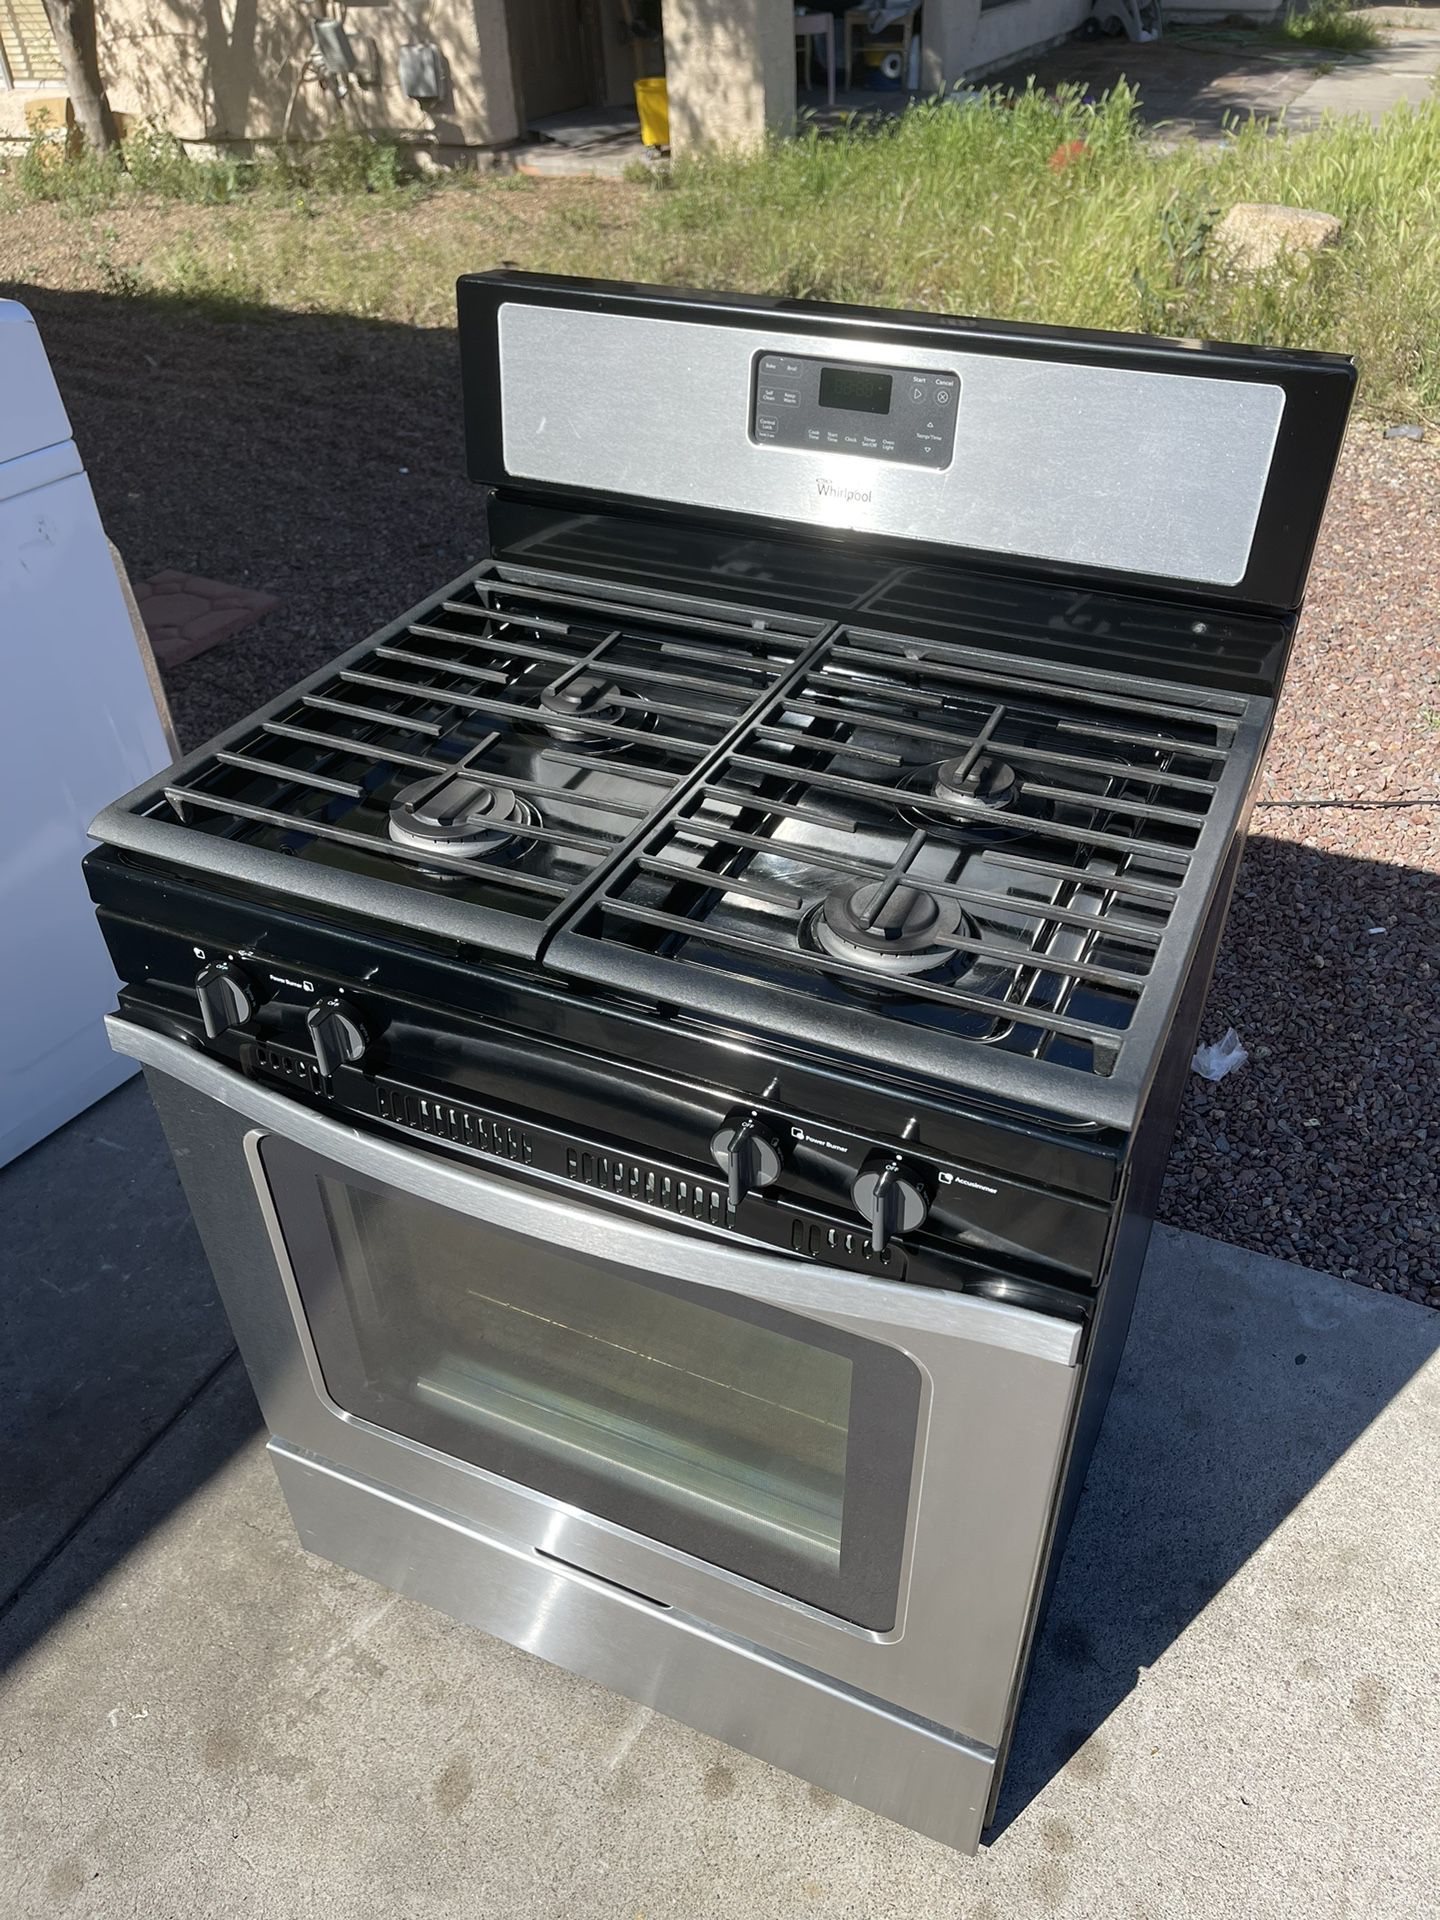 Range Stove Gas Stainless Steel 30 Day Warranty 